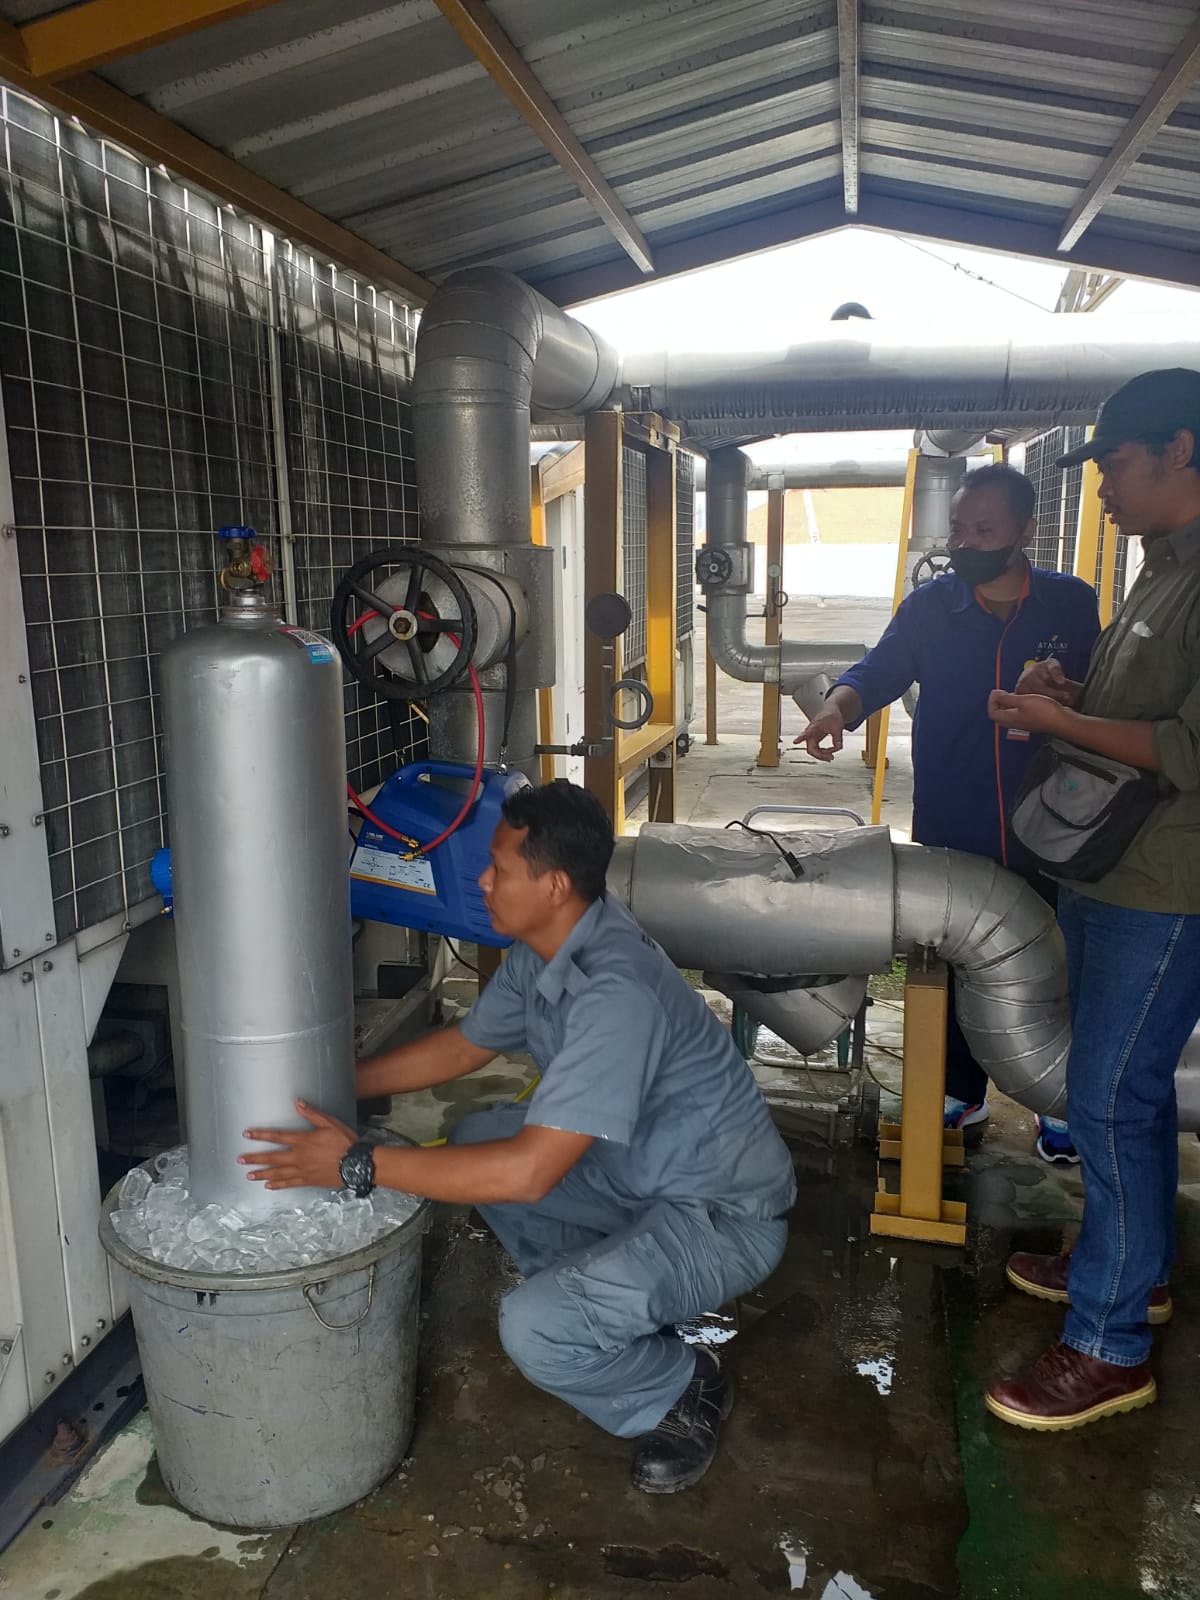 Technicians performing a refrigerant recovery in Indonesia. Credit: Recoolit (recoolit.com).